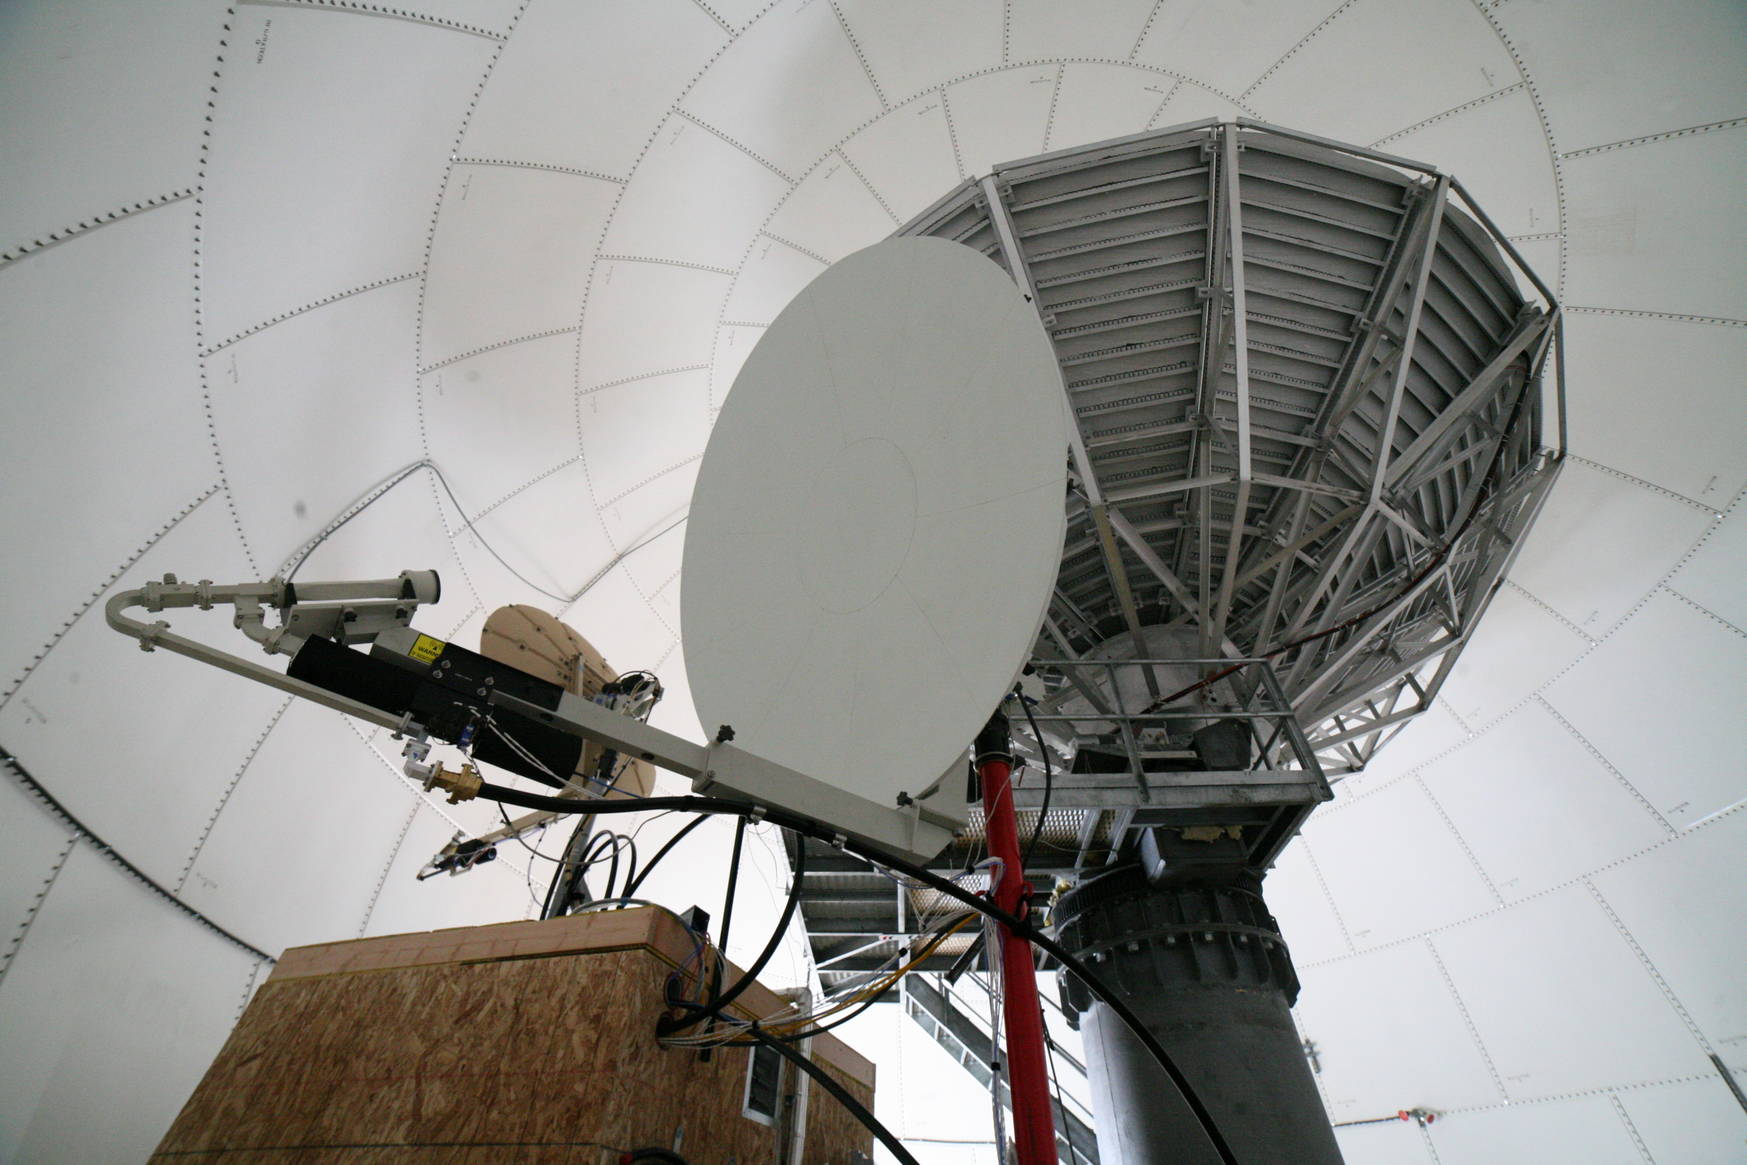 The Skynet and DSCS antennae (left), and the out-of-order 9m dish for future use (top right).